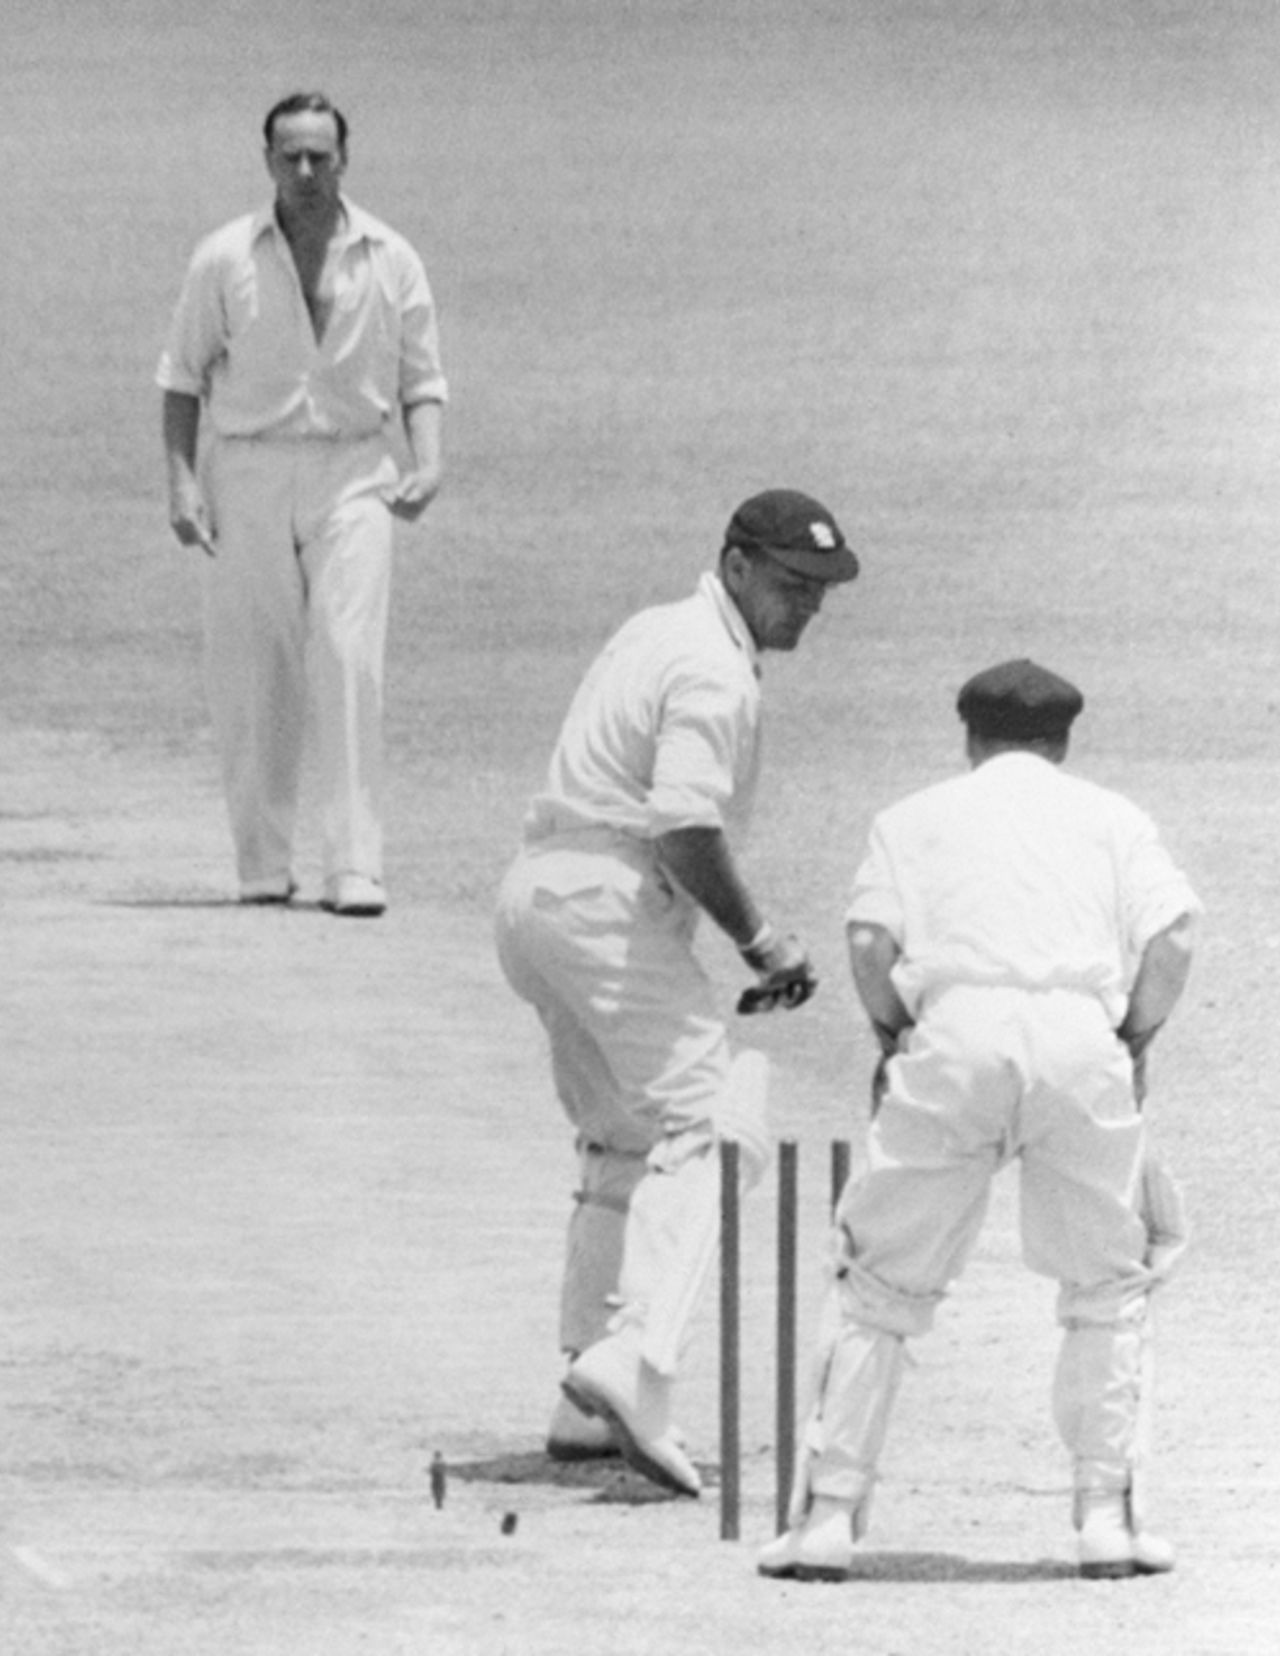 Alec Bedser turns to see that he has been clean bowled by Ian Johnson, Australia v England, 1st Test, Melbourne, November 30, 1954